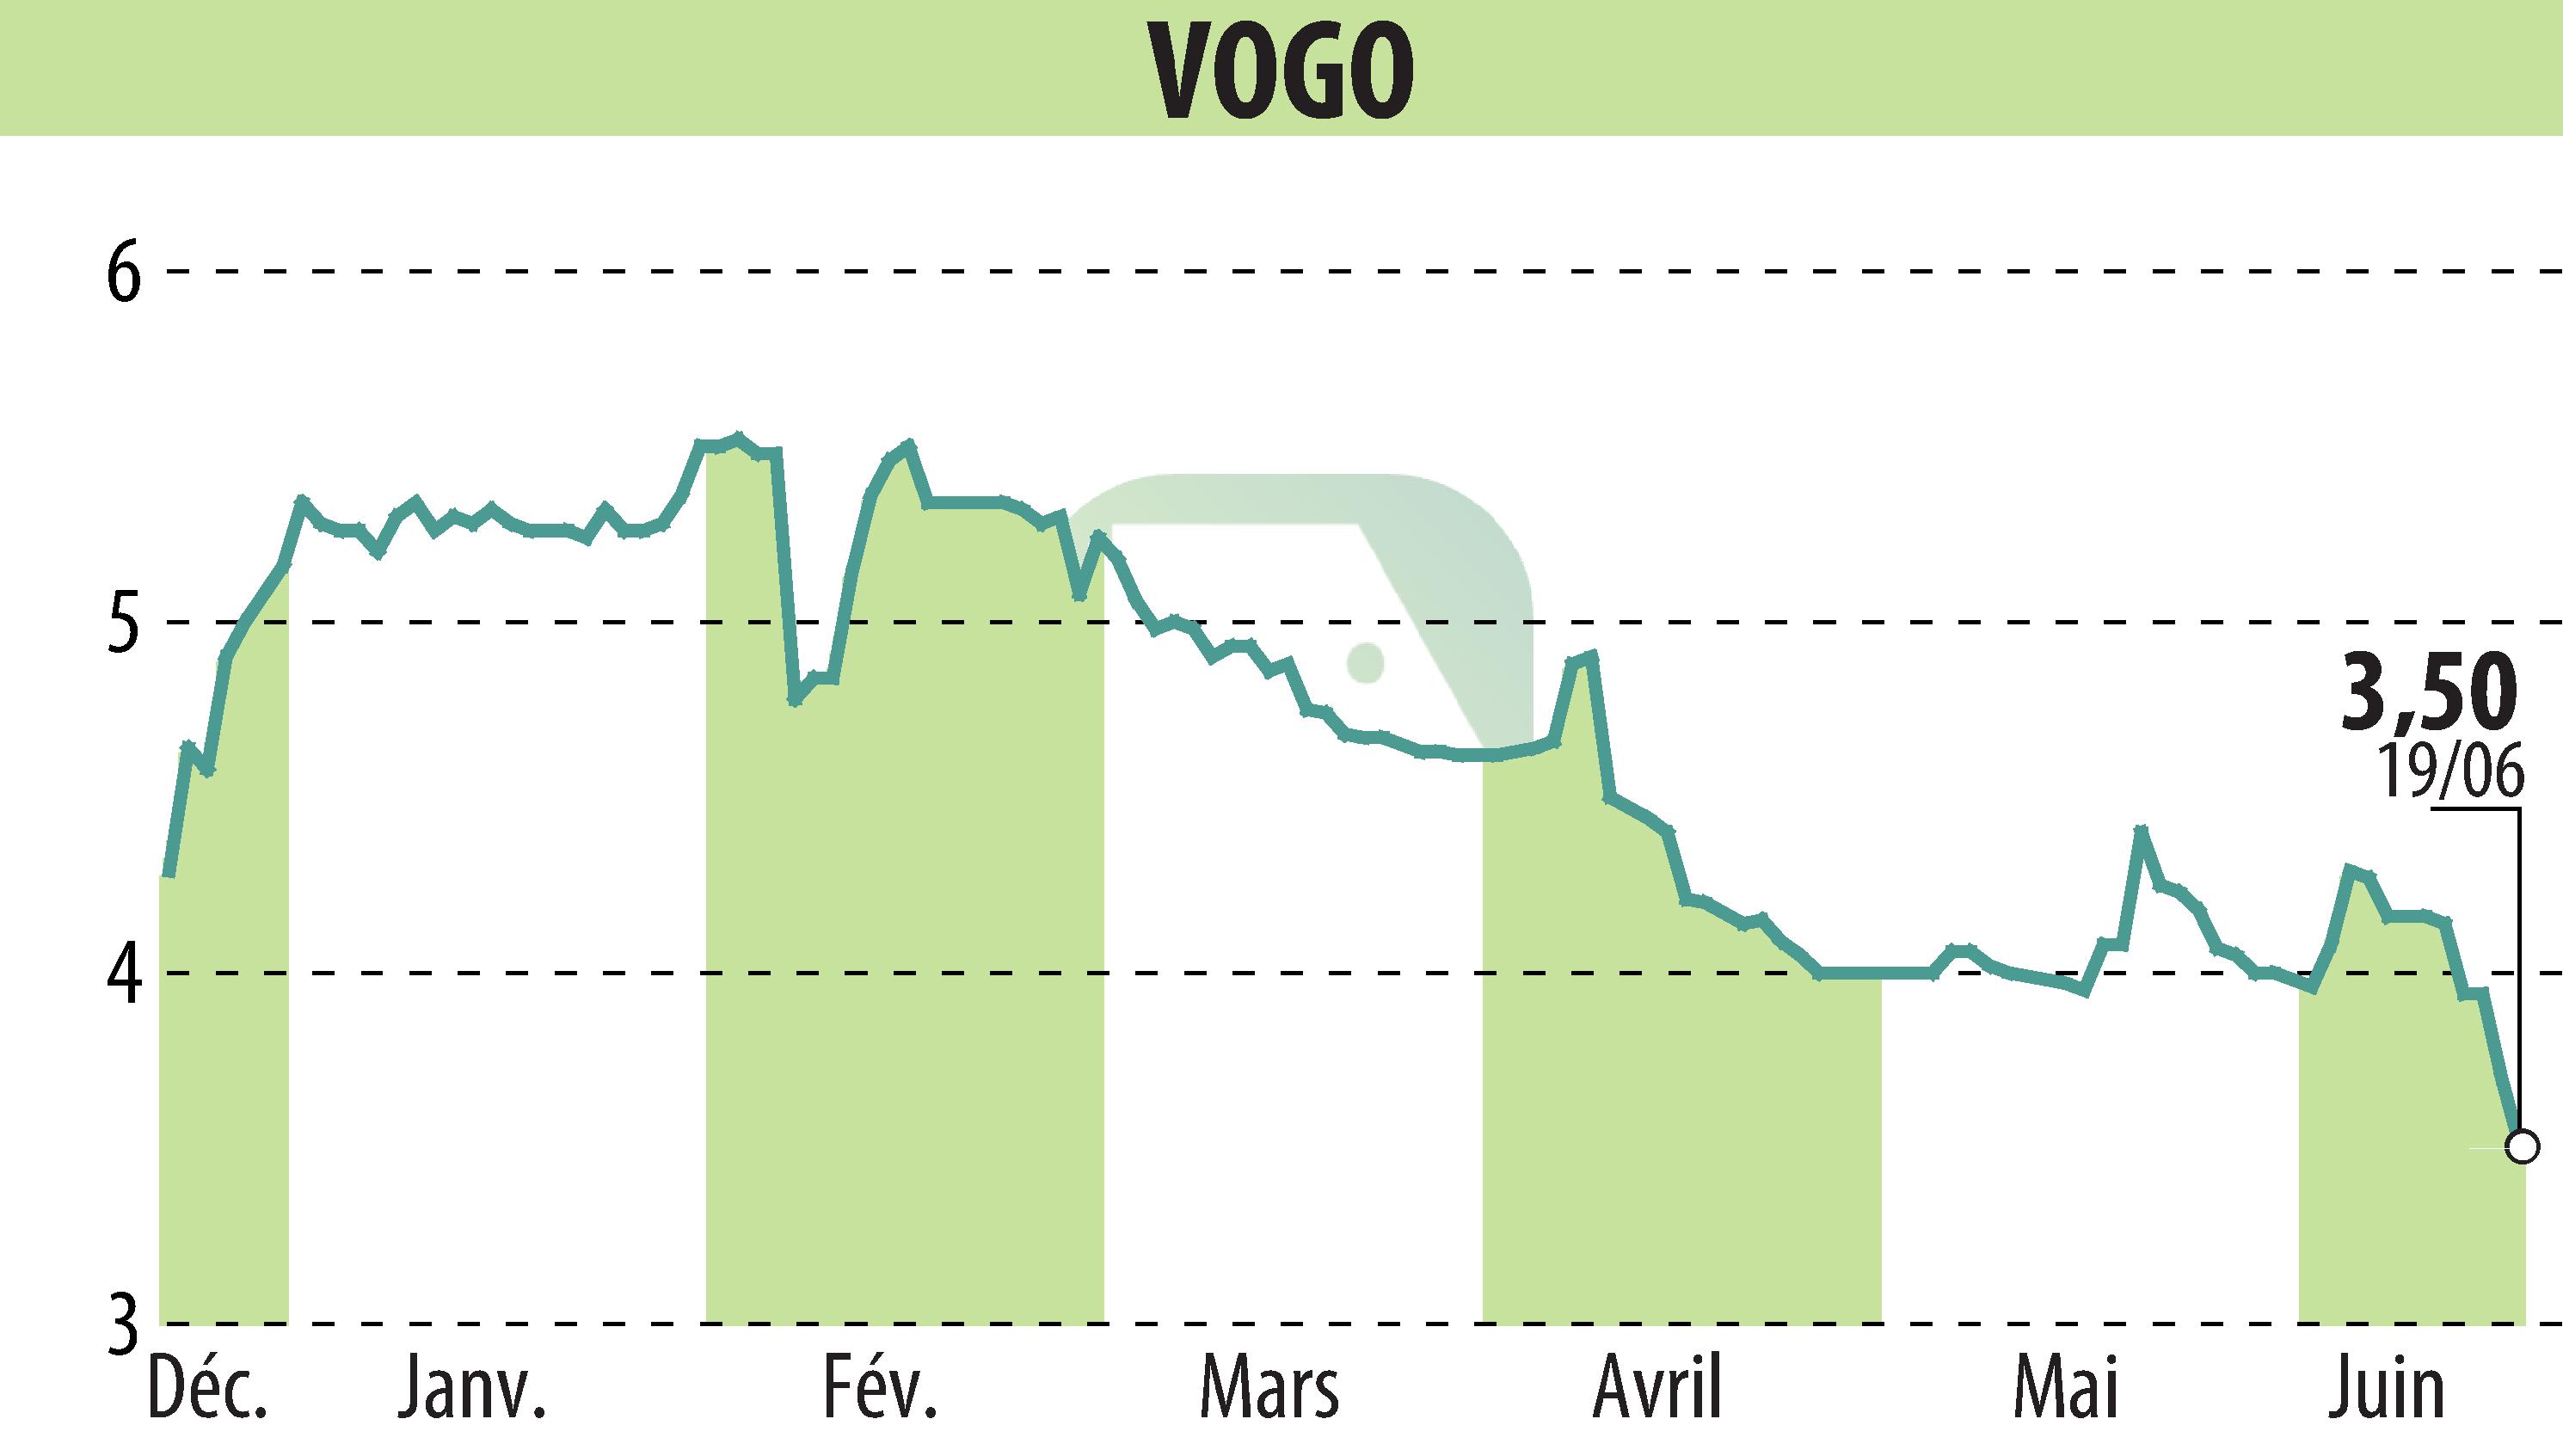 Stock price chart of VOGO (EPA:ALVGO) showing fluctuations.